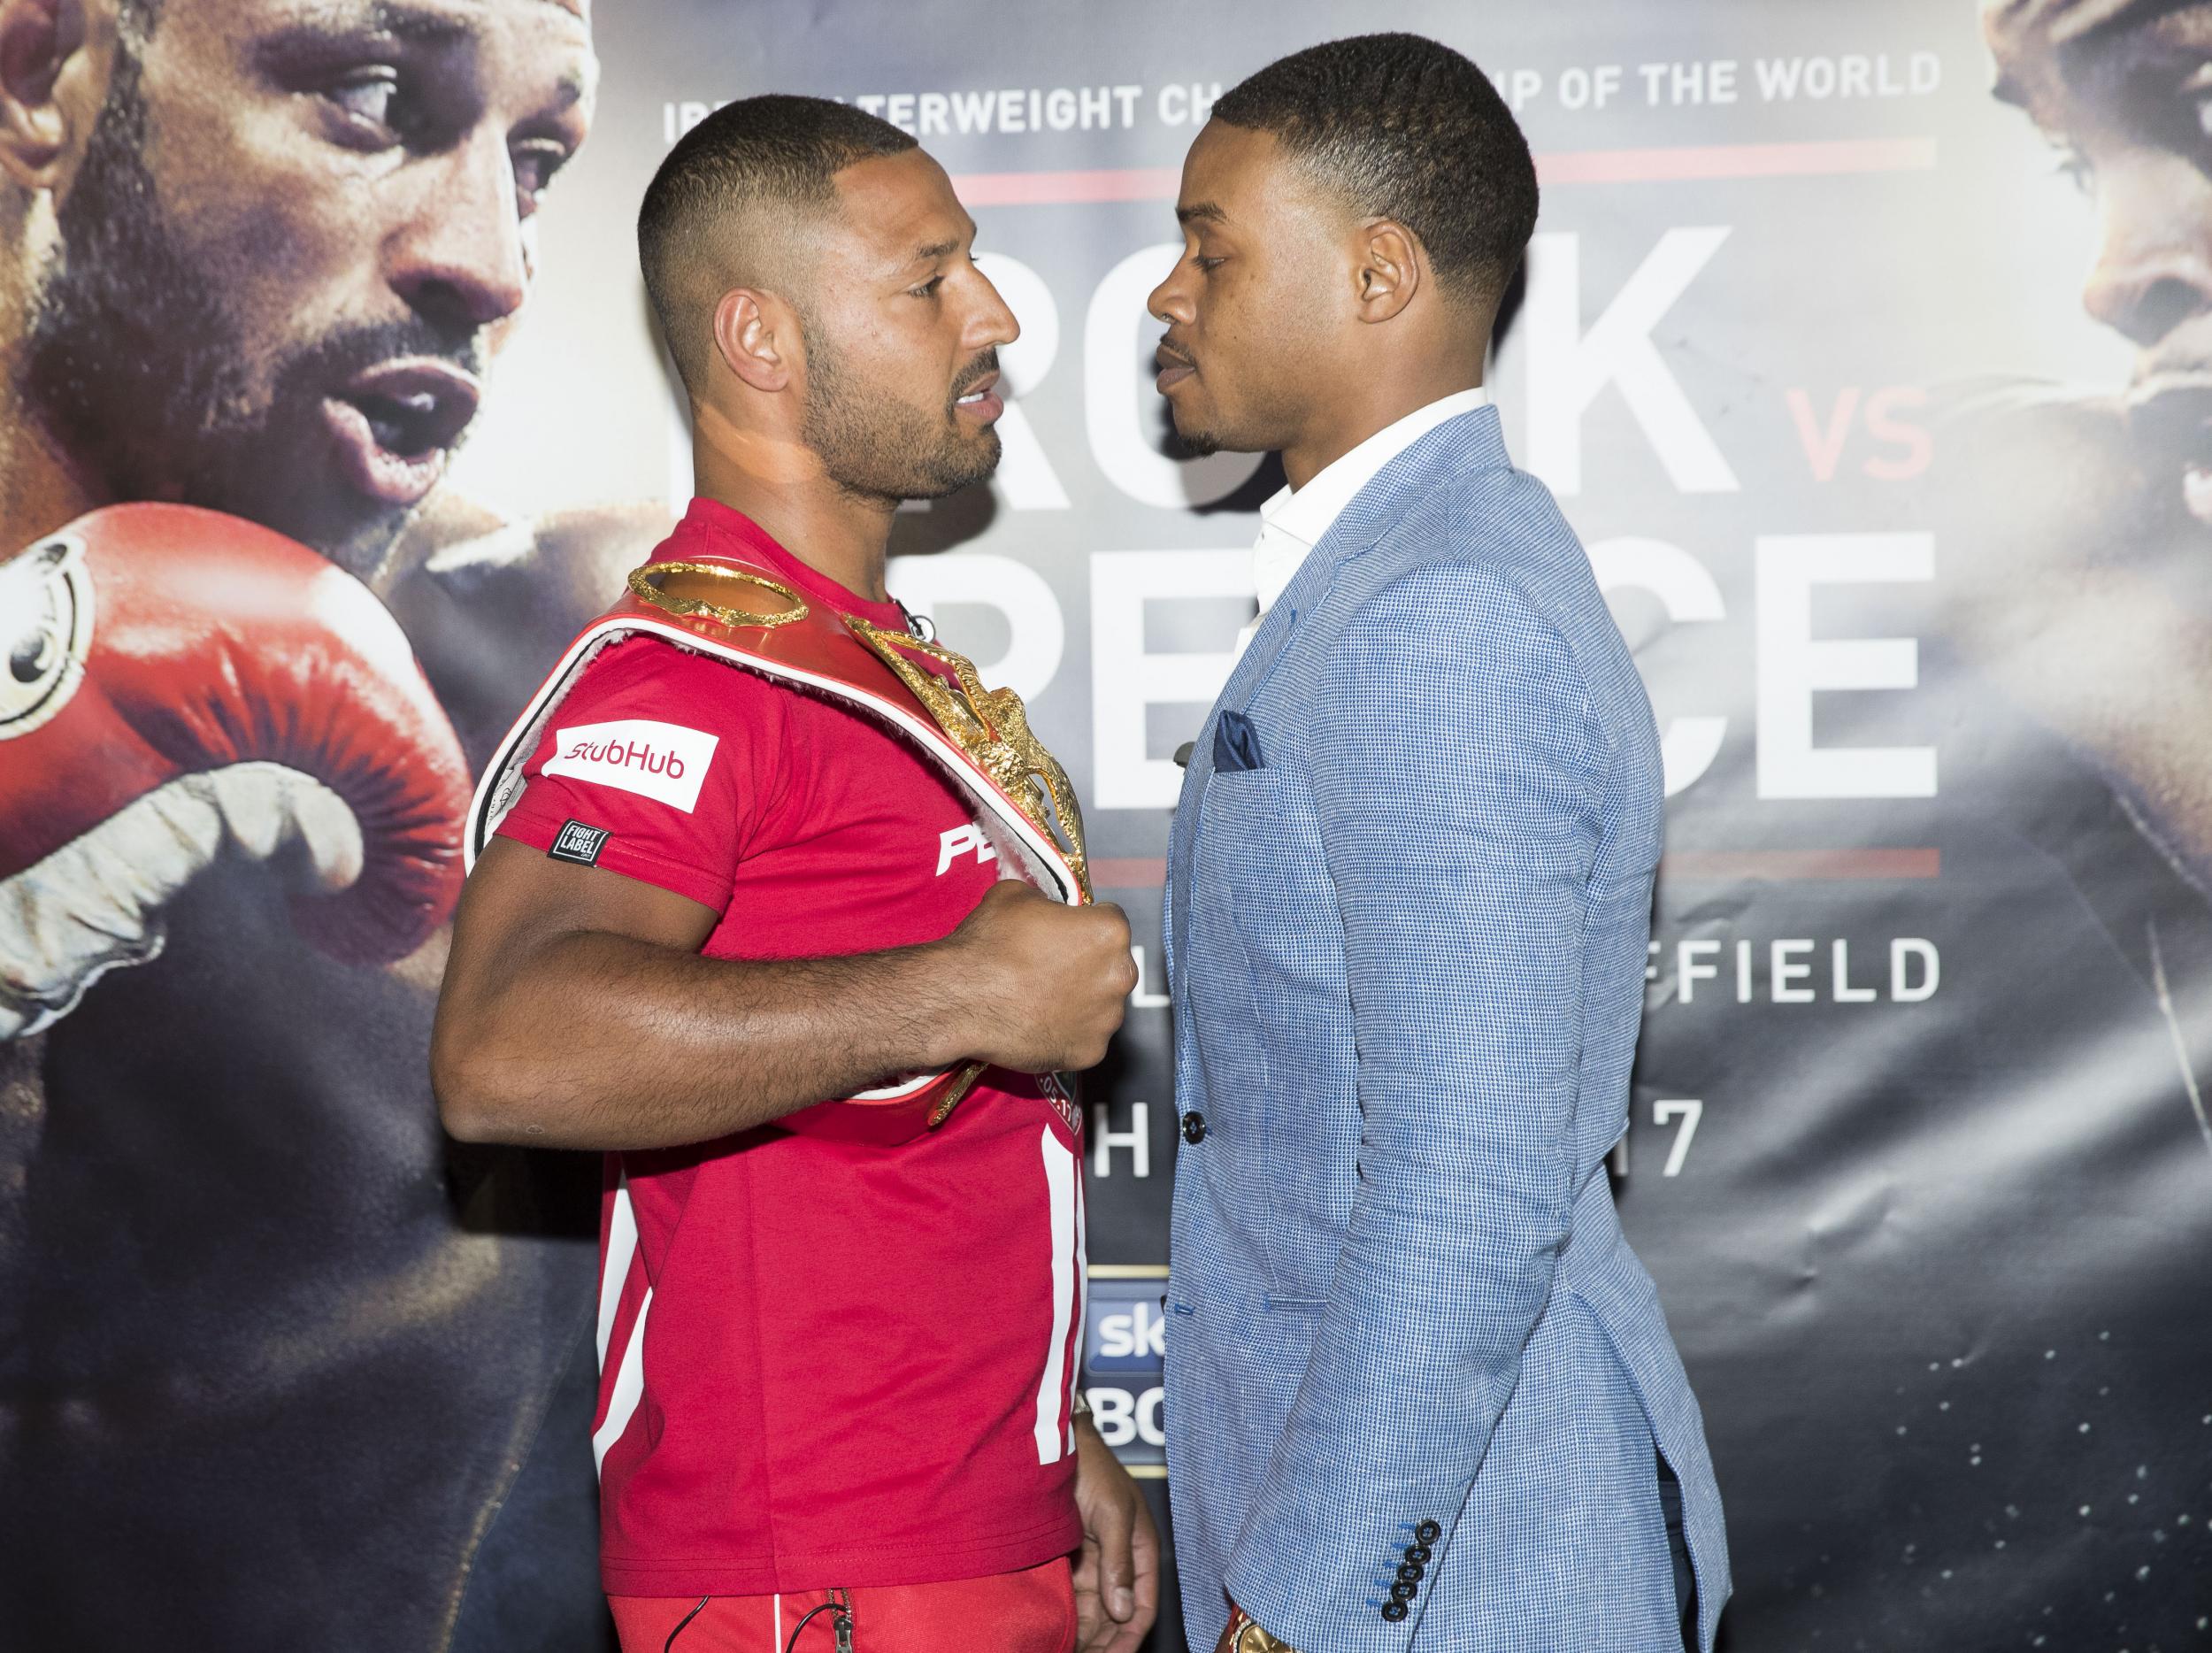 Brook and Spence will collide in a IBF welterweight world title fight